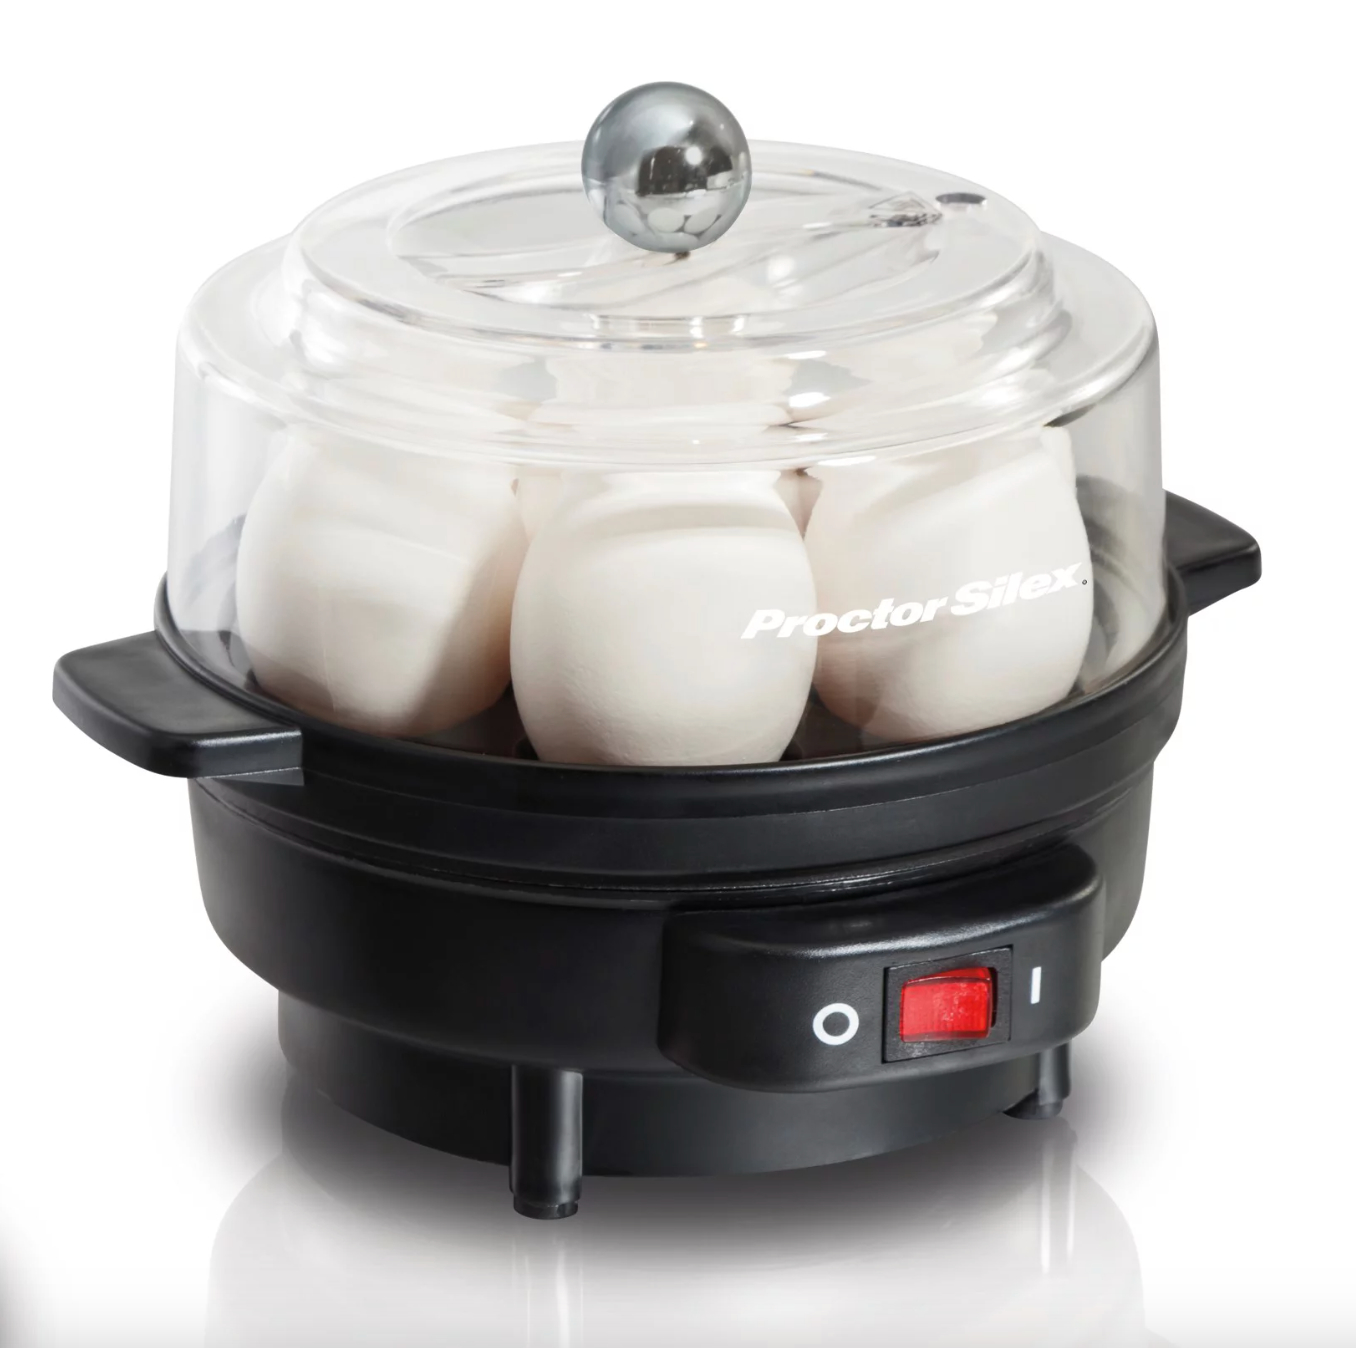 the black egg cooker being used to cook several eggs in their shells